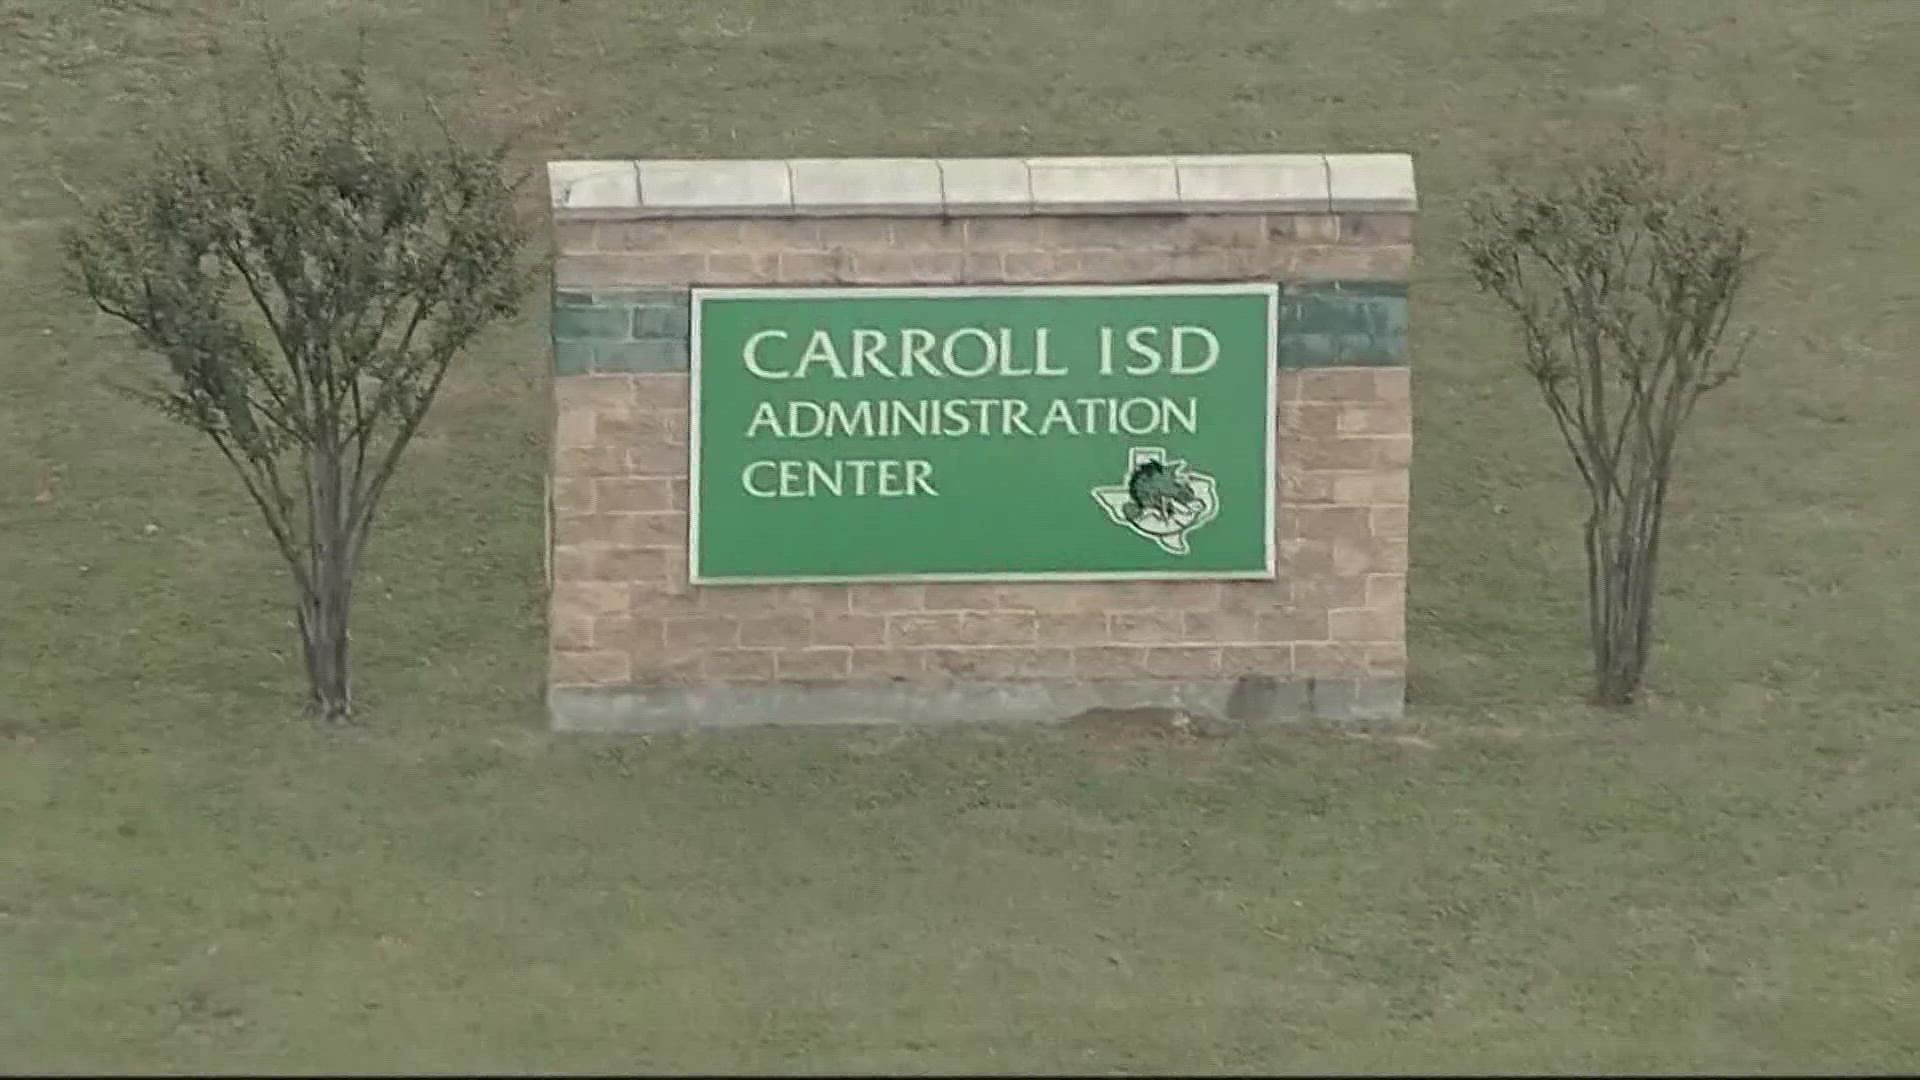 "We recognize there are not two sides of the Holocaust," Carroll ISD's superintendent said in a statement after a report by NBC News.